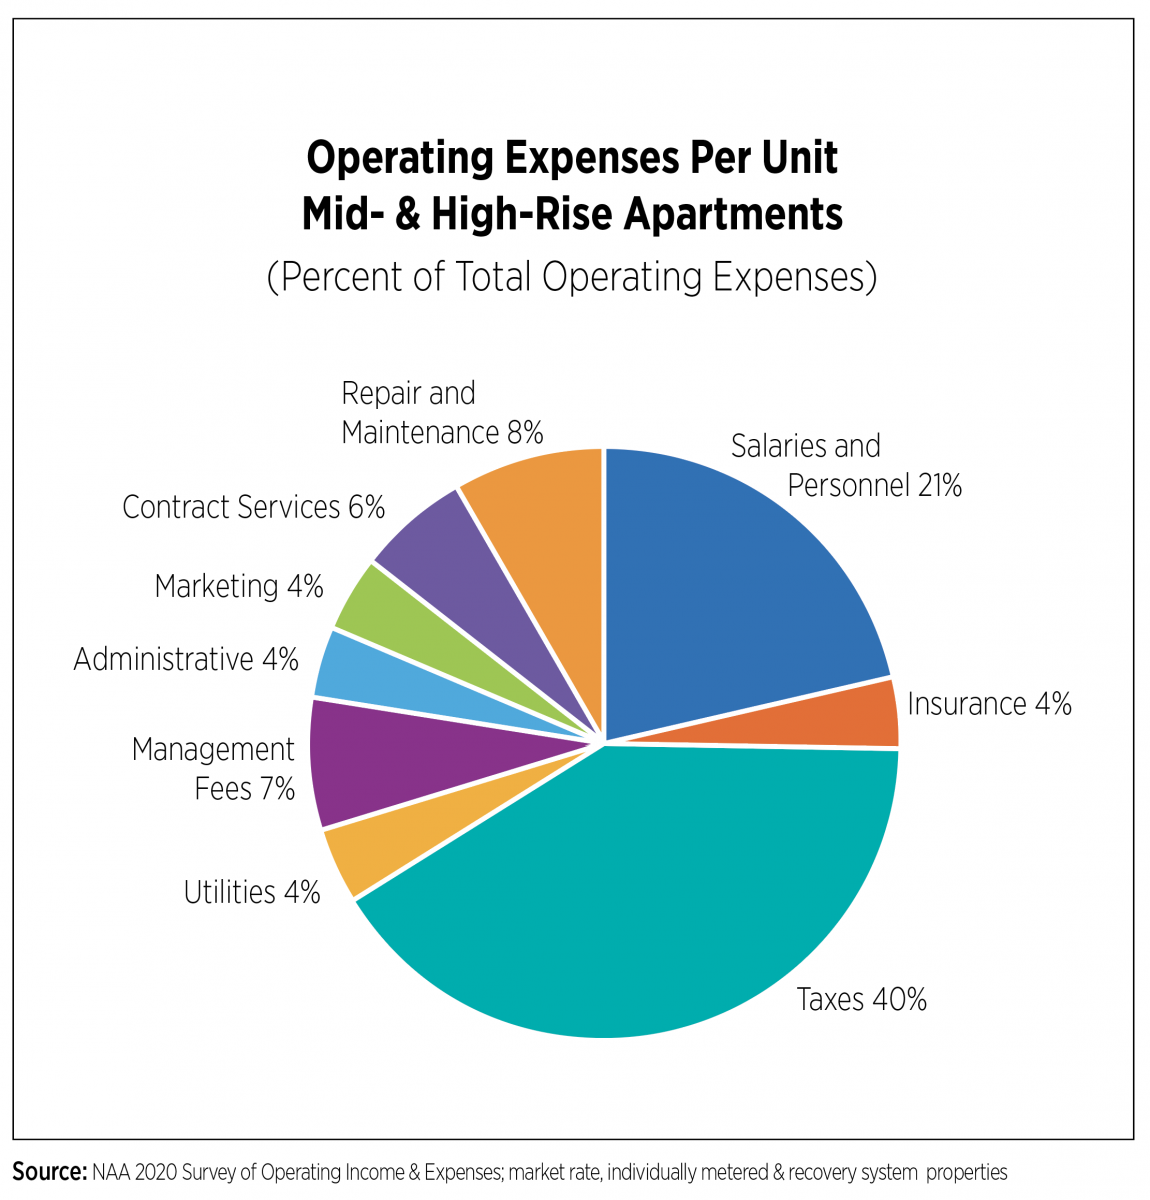 Operating Expenses per Unit - Mid- and High-Rise Apartments